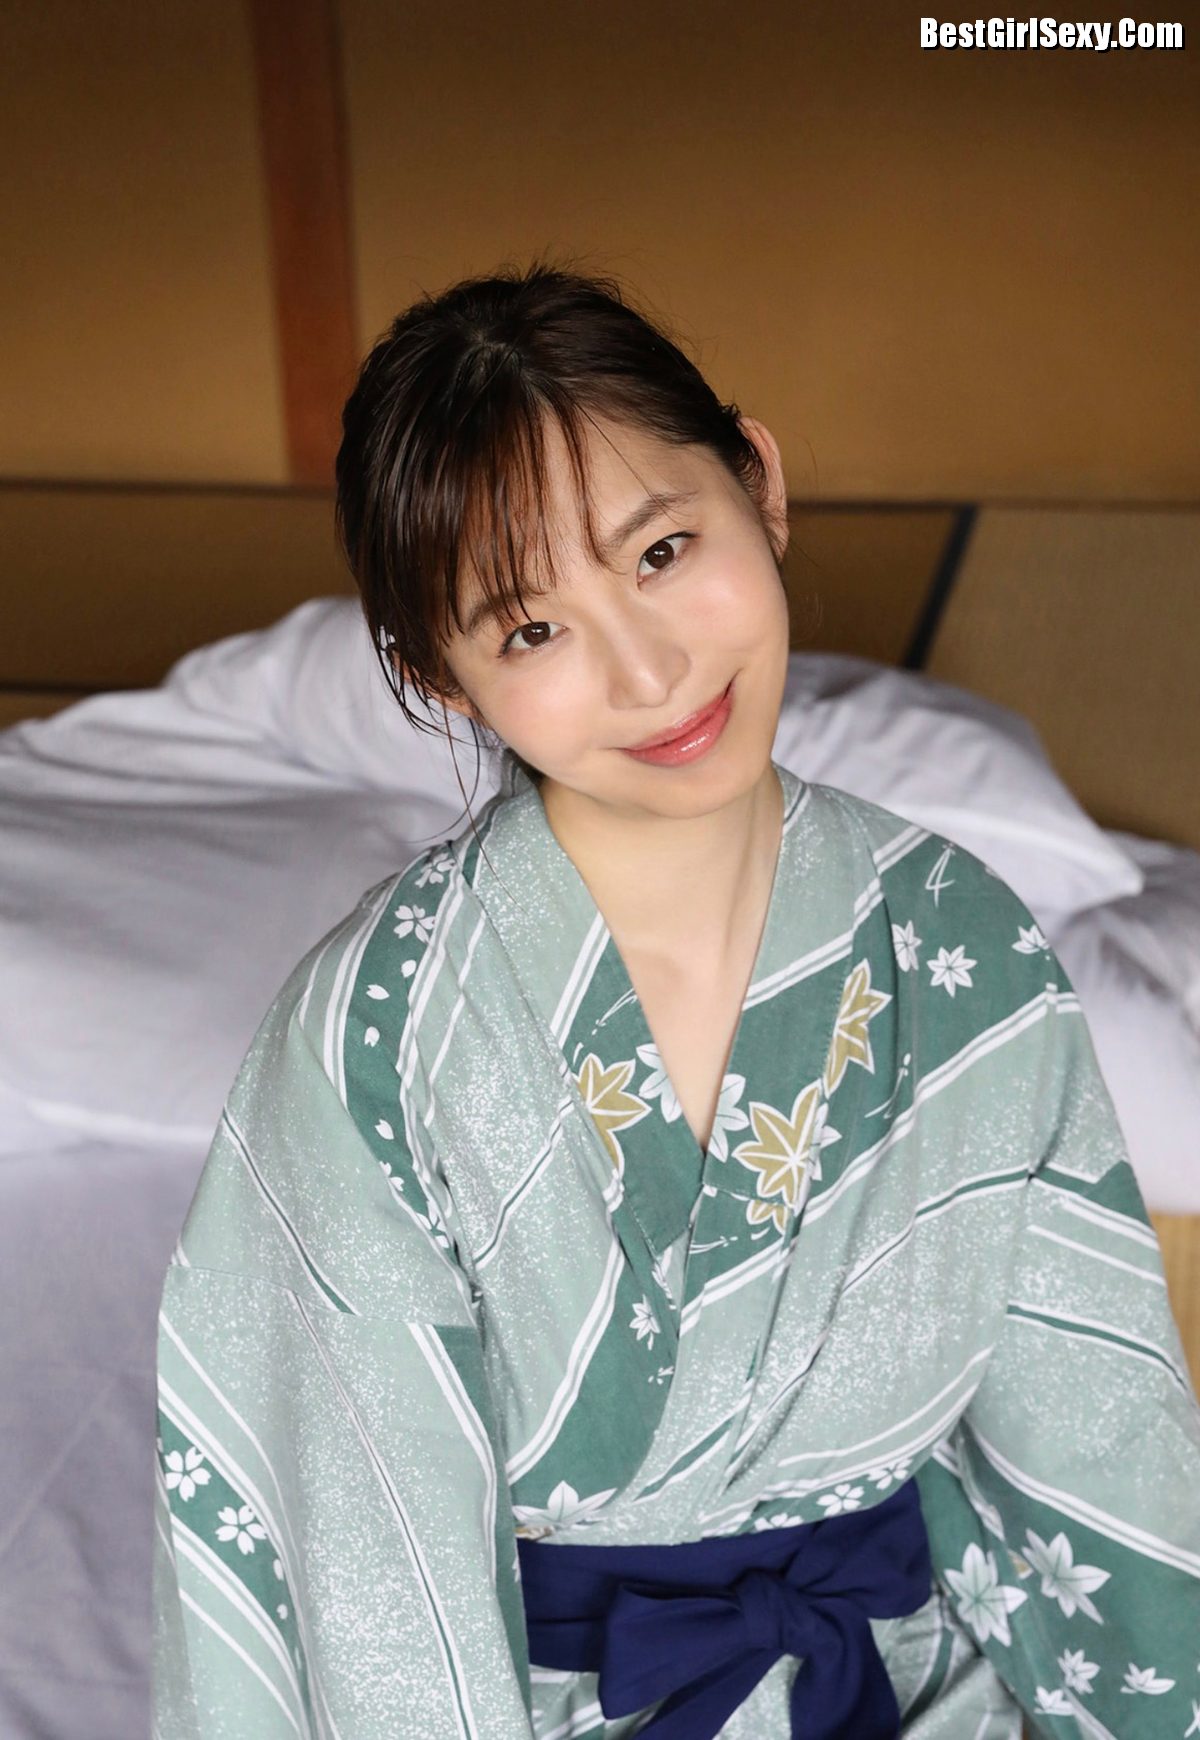 FRIDAY Misumi Shiochi 塩地美澄 One Night And Two Days A Special Journey Vol 3 0081 4451501713.jpg